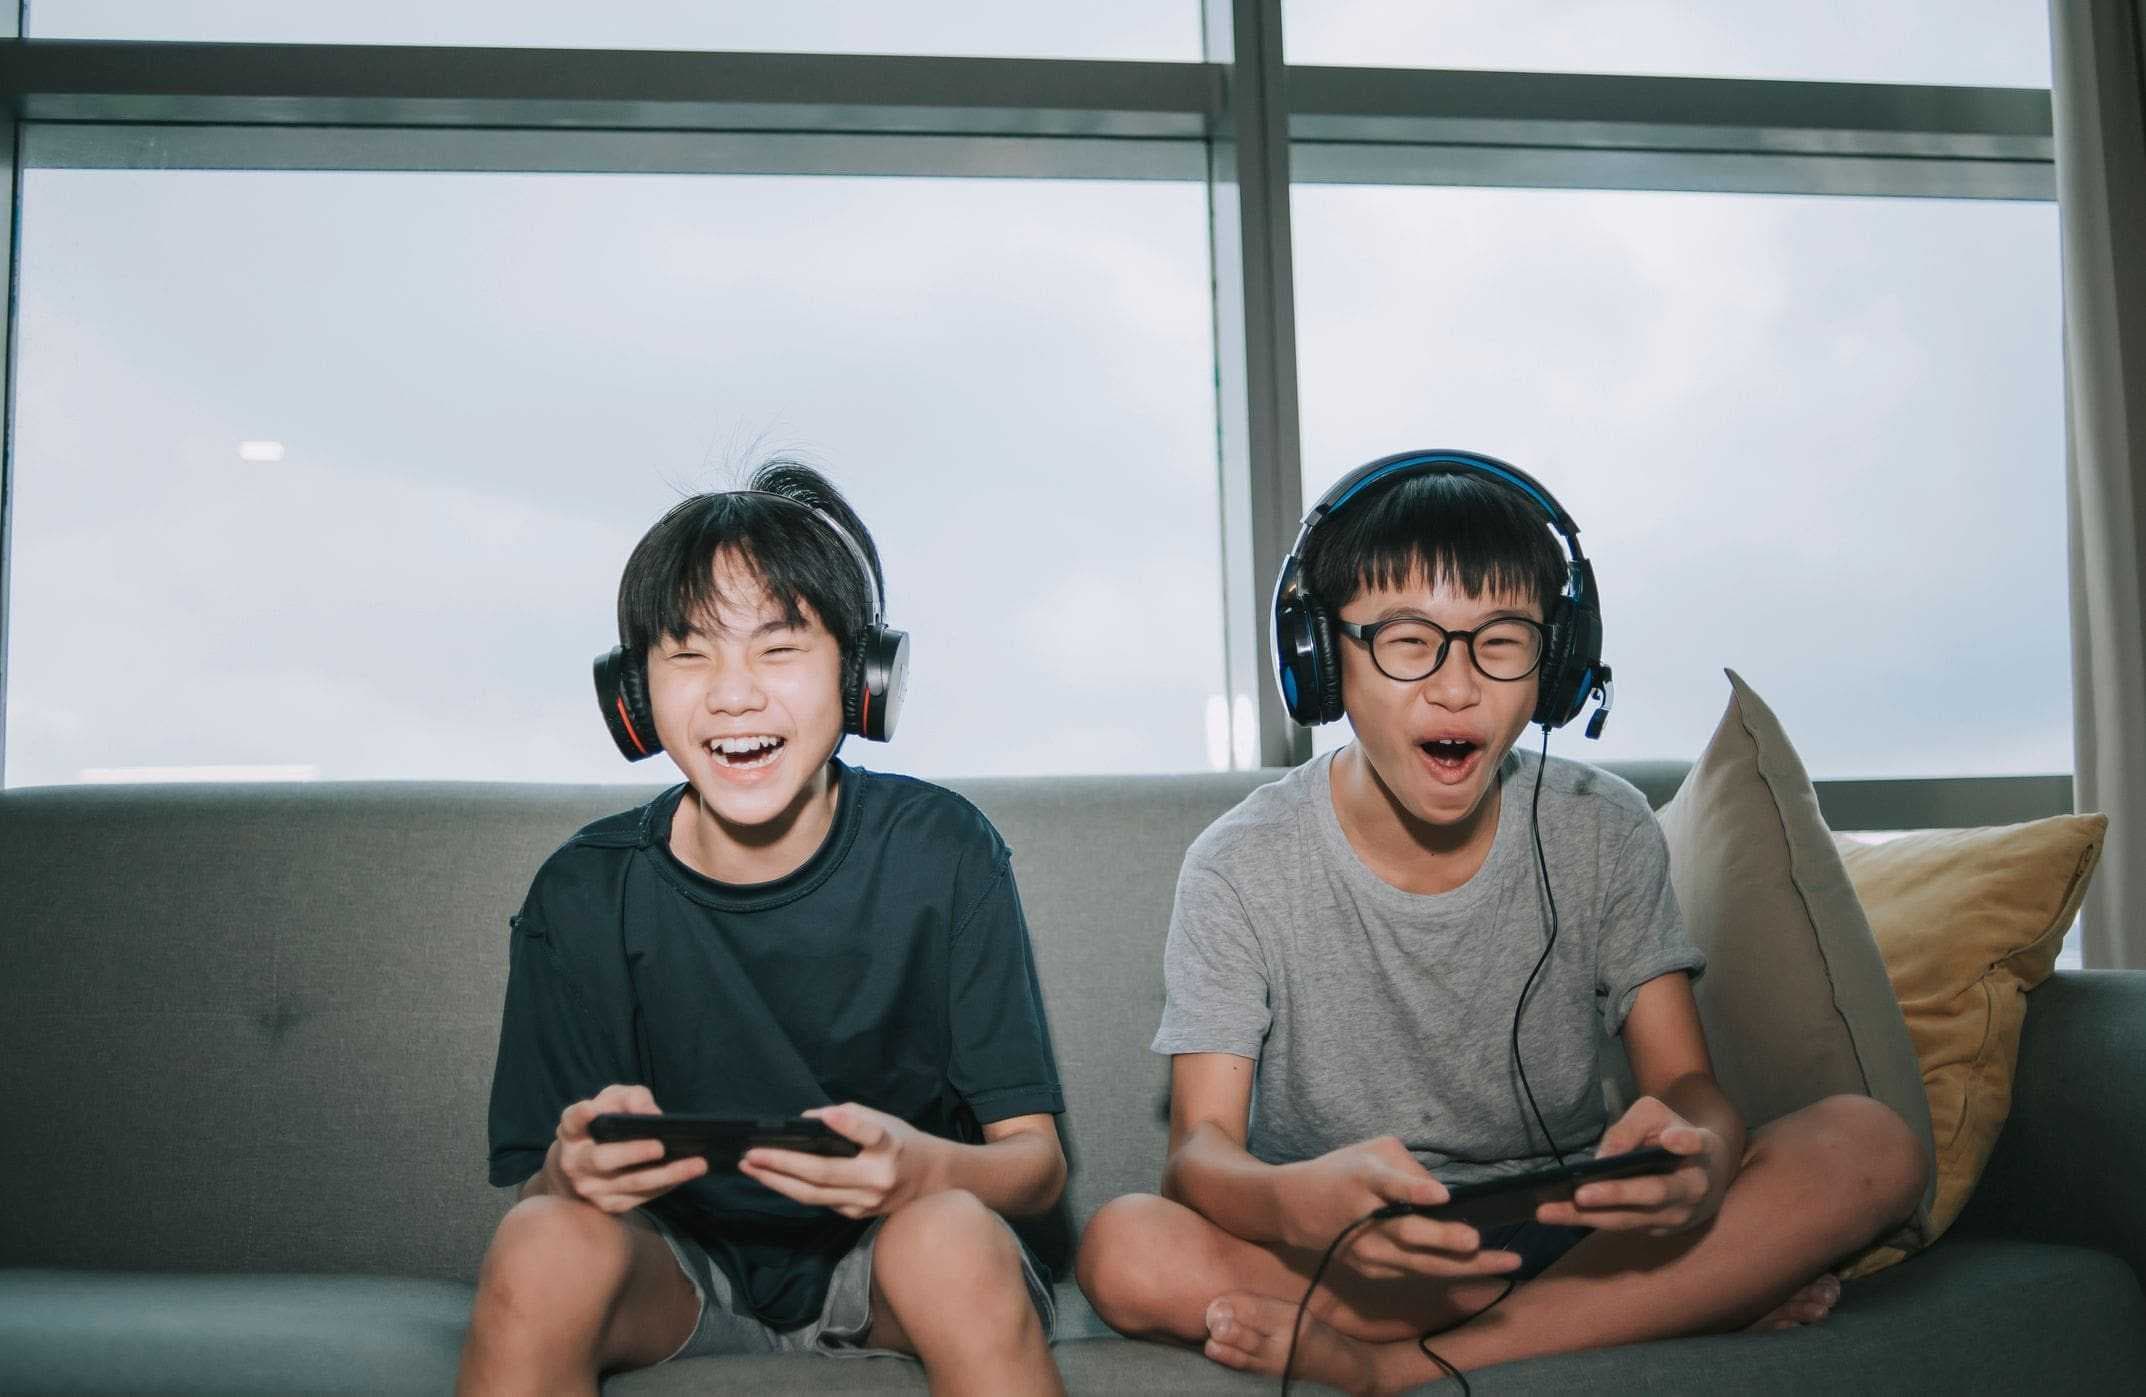 two kids on couch laughing playing video games